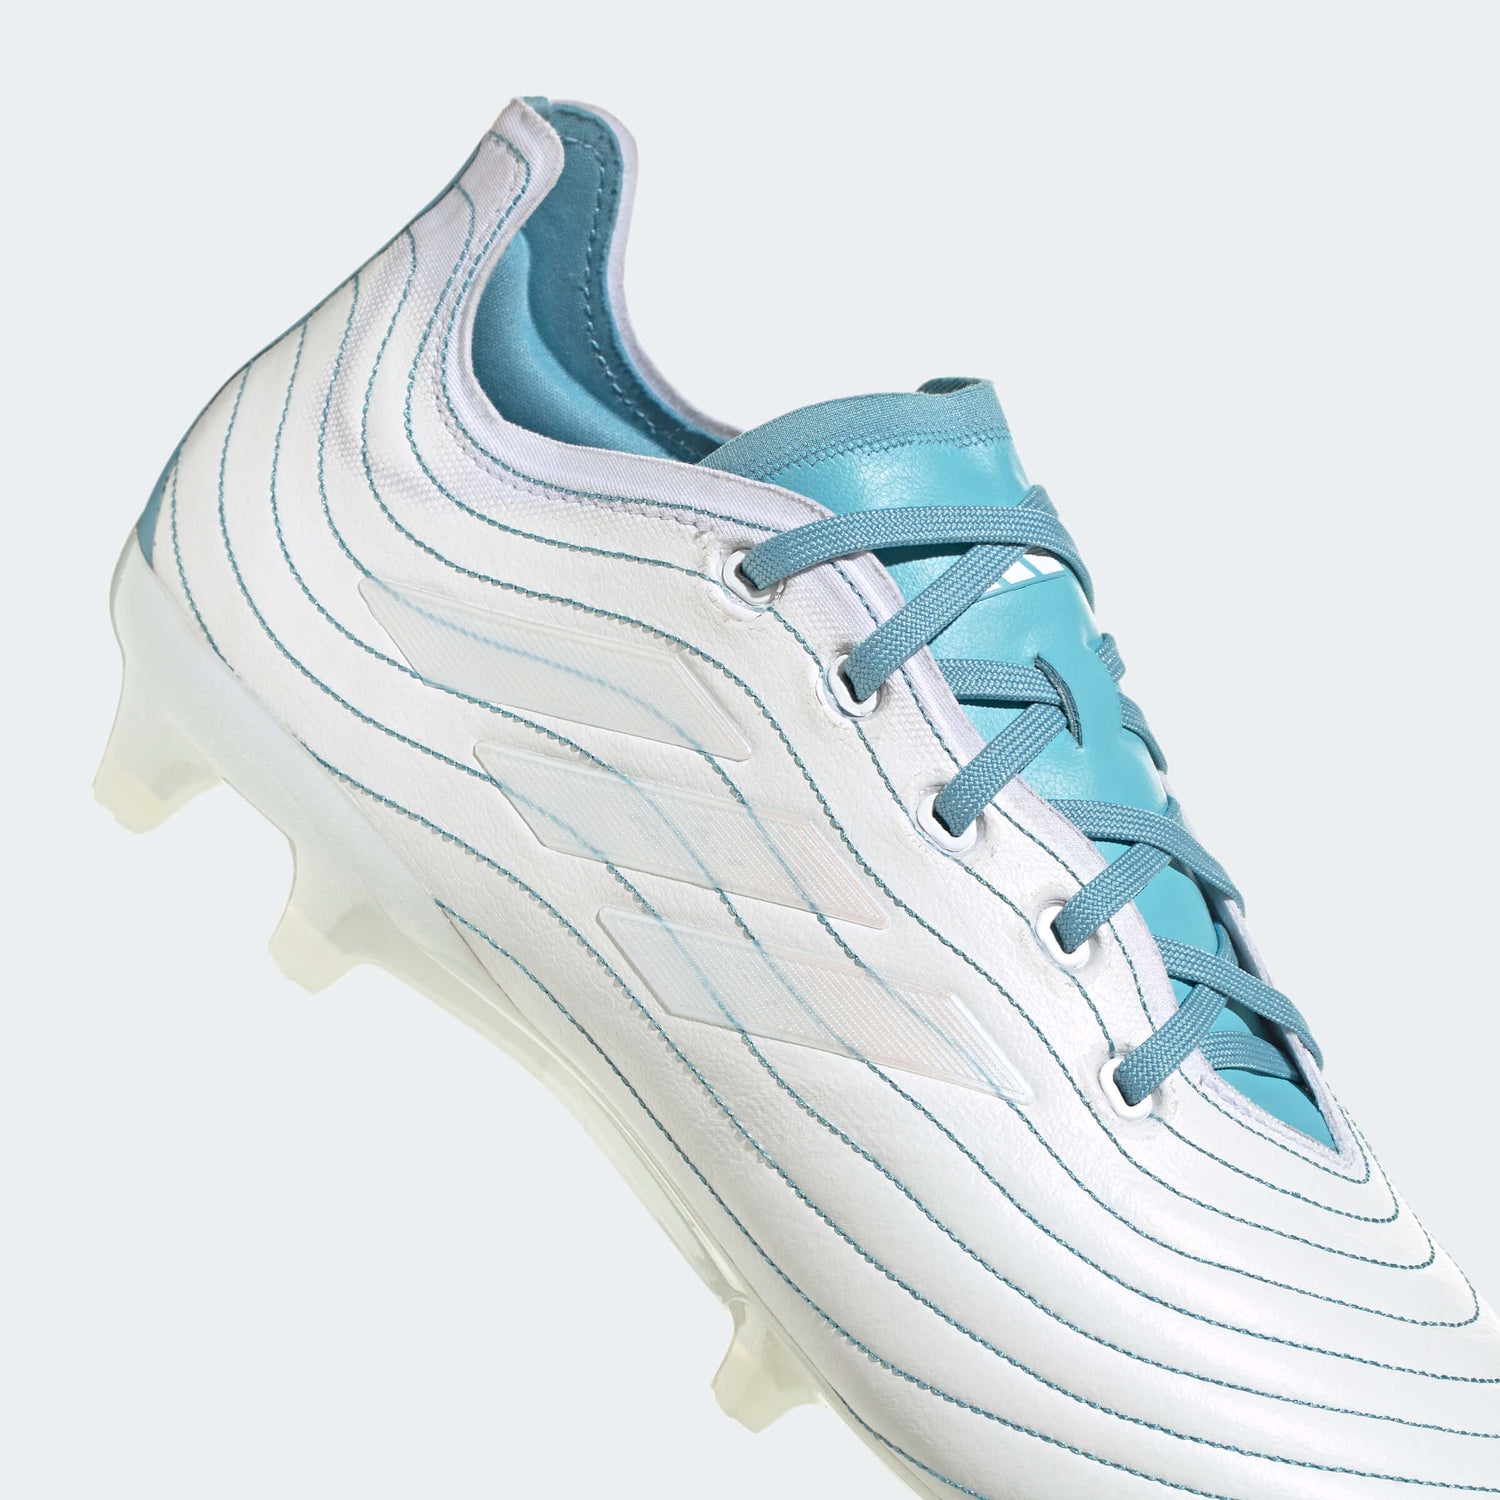 adidas Copa Pure .1 FG - Parley Pack (SP23) (Detail 2)